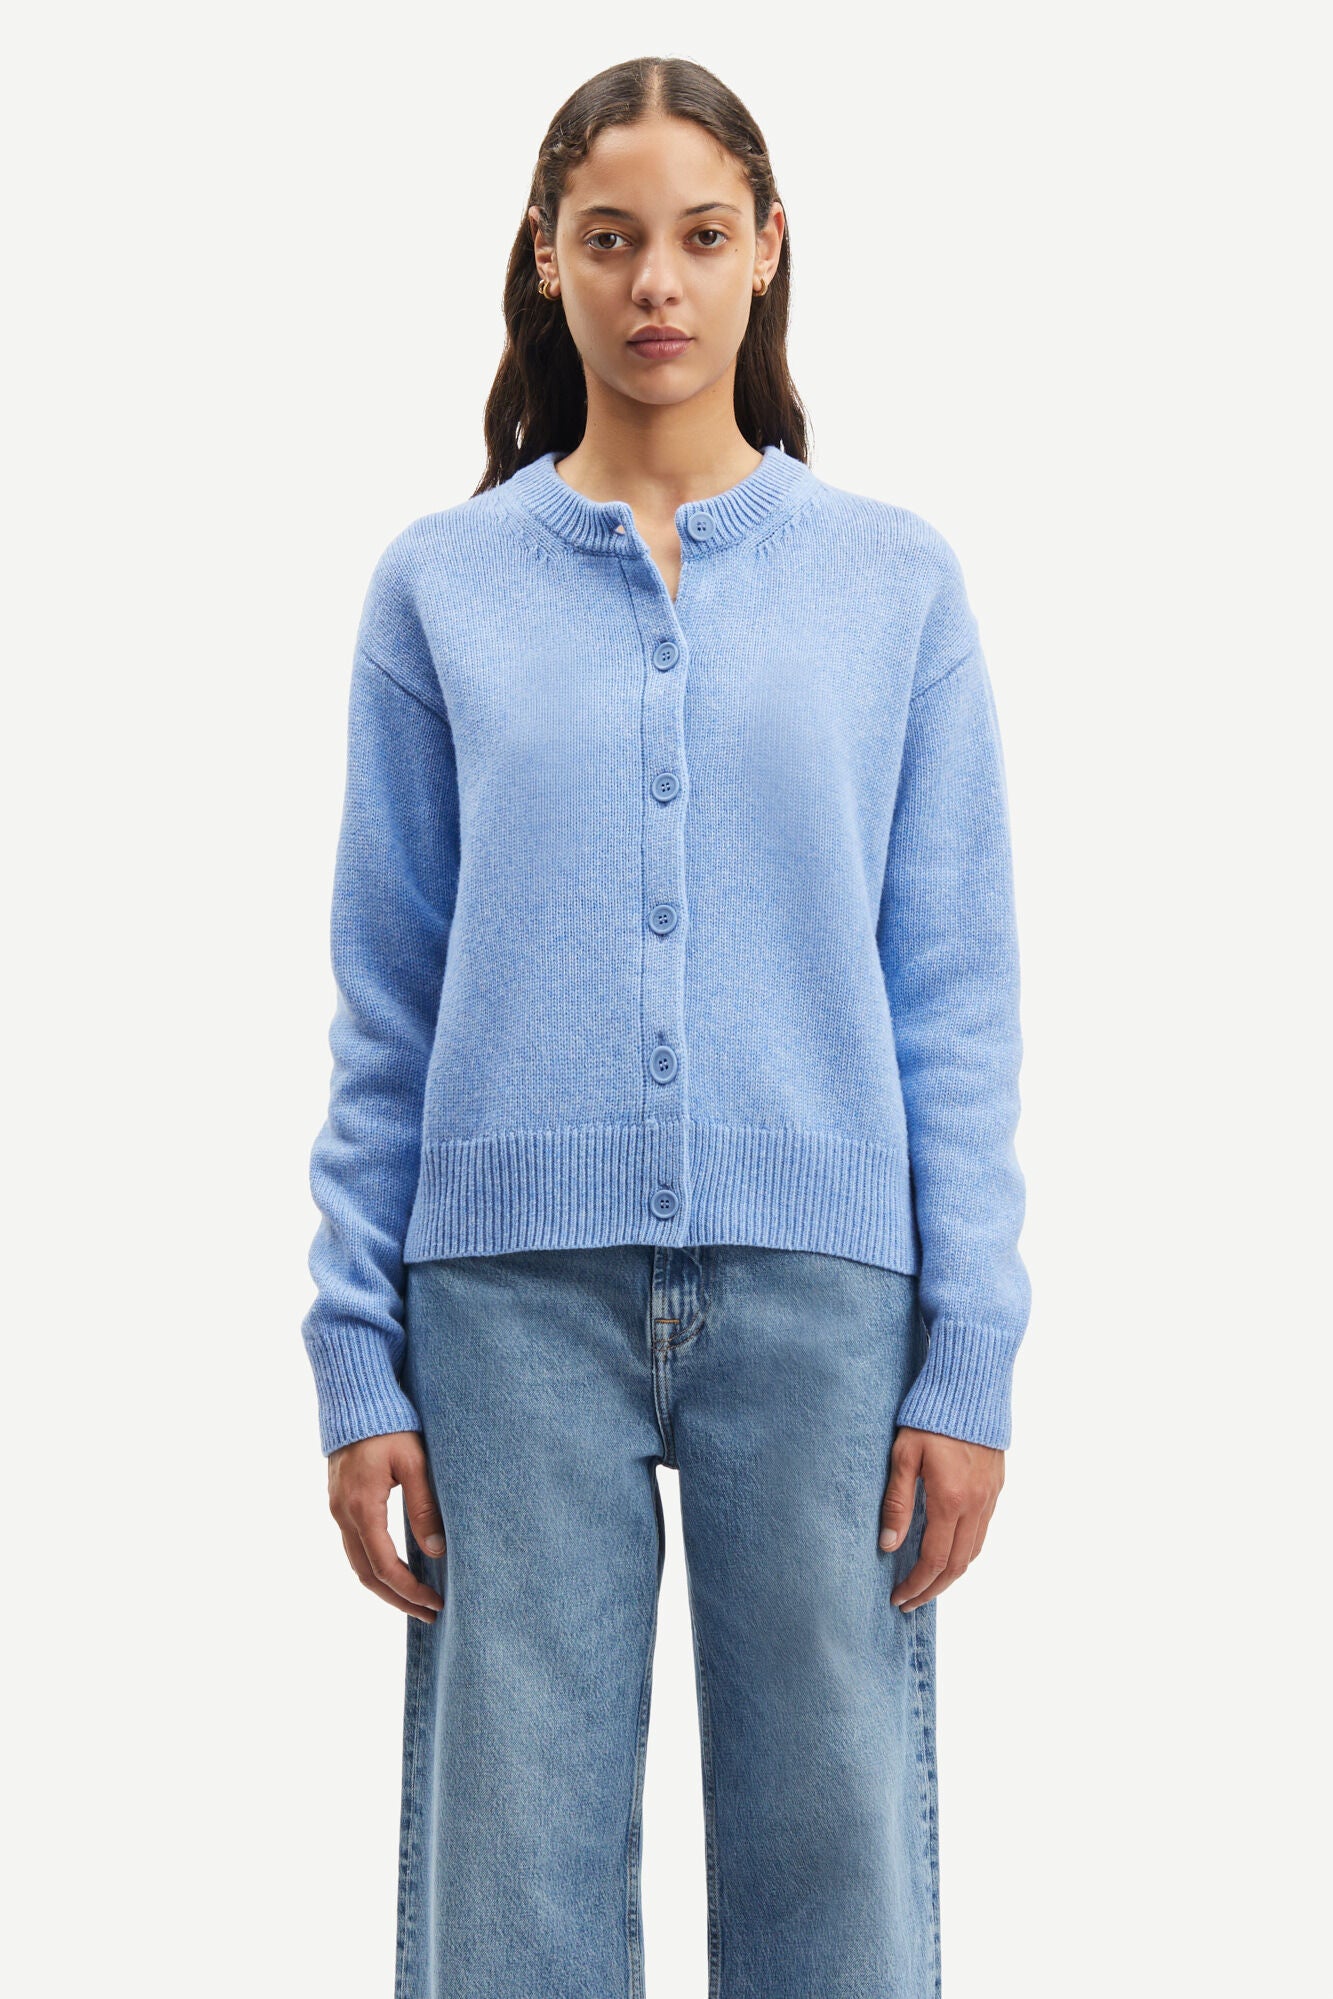 Marly cardigan in oxford blue